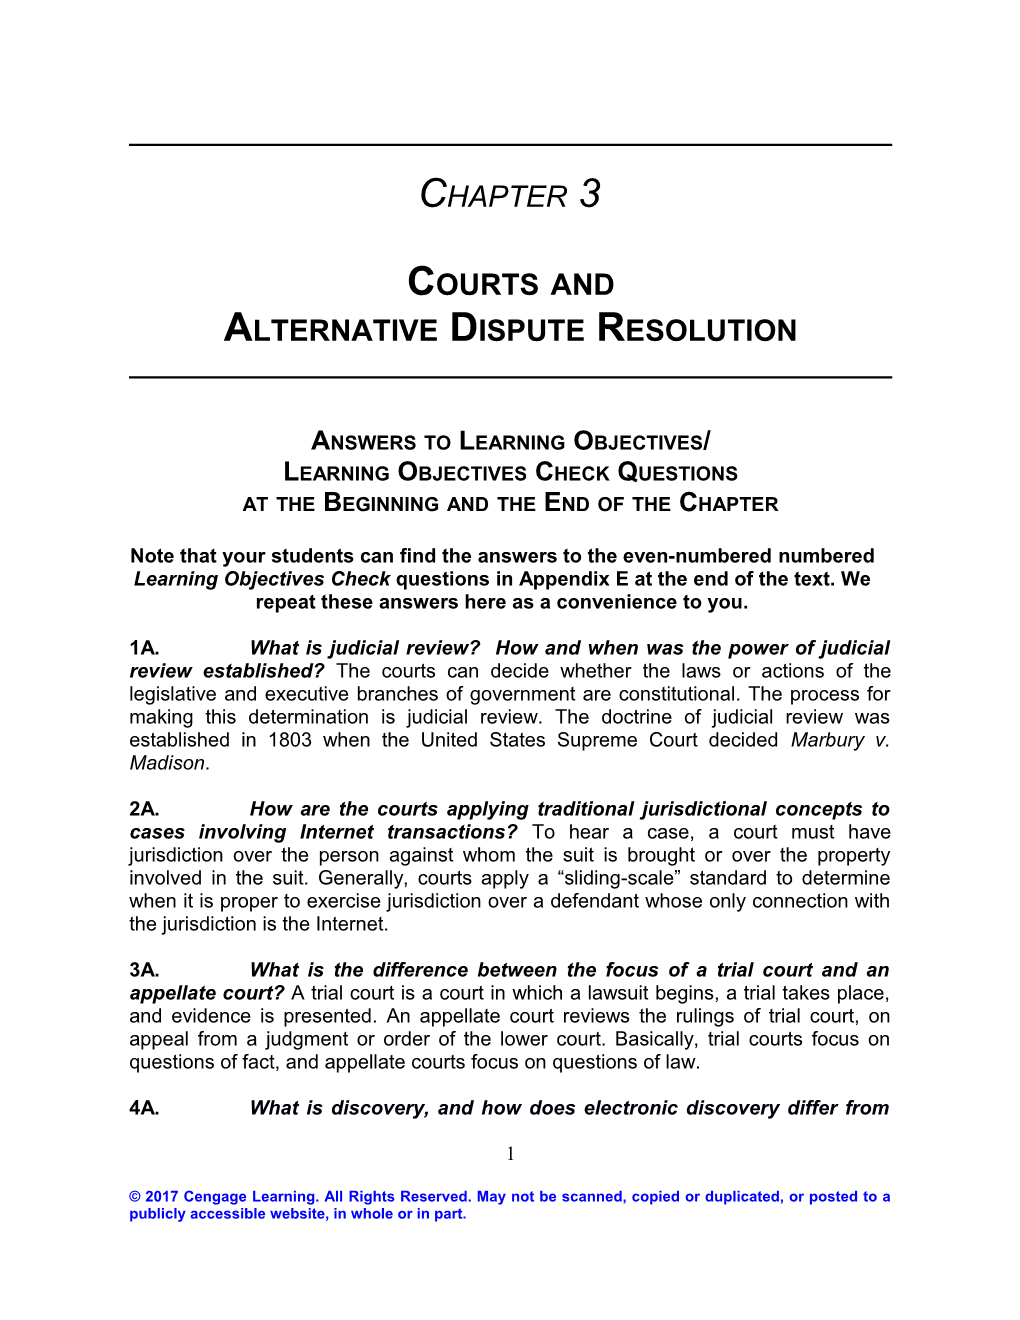 Chapter 3: Courts and Alternative Dispute Resolution 1